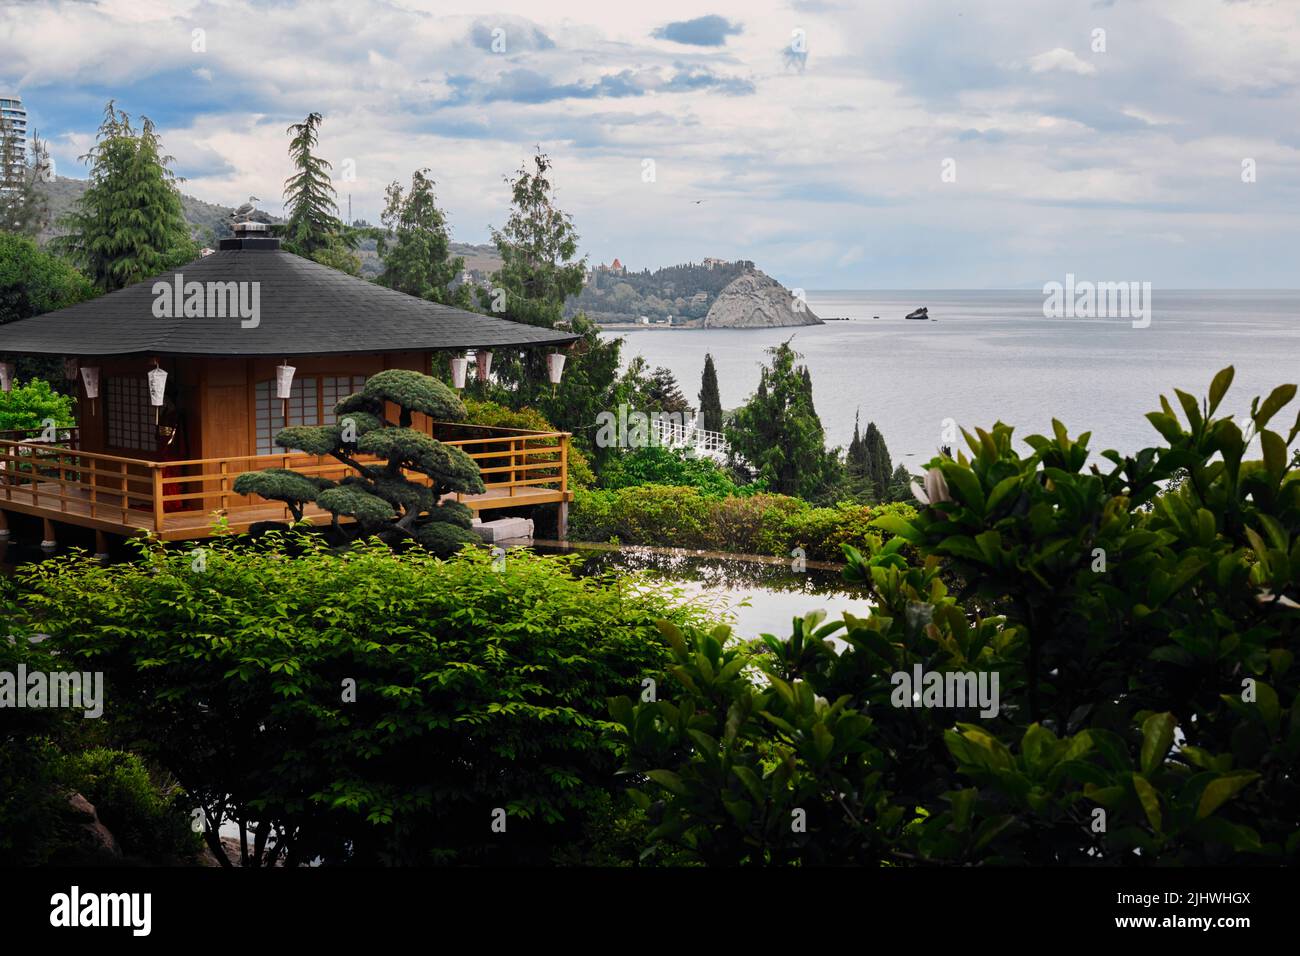 Japanese-style house by the sea. View of the sea, rocks and forest. Front view. Stock Photo